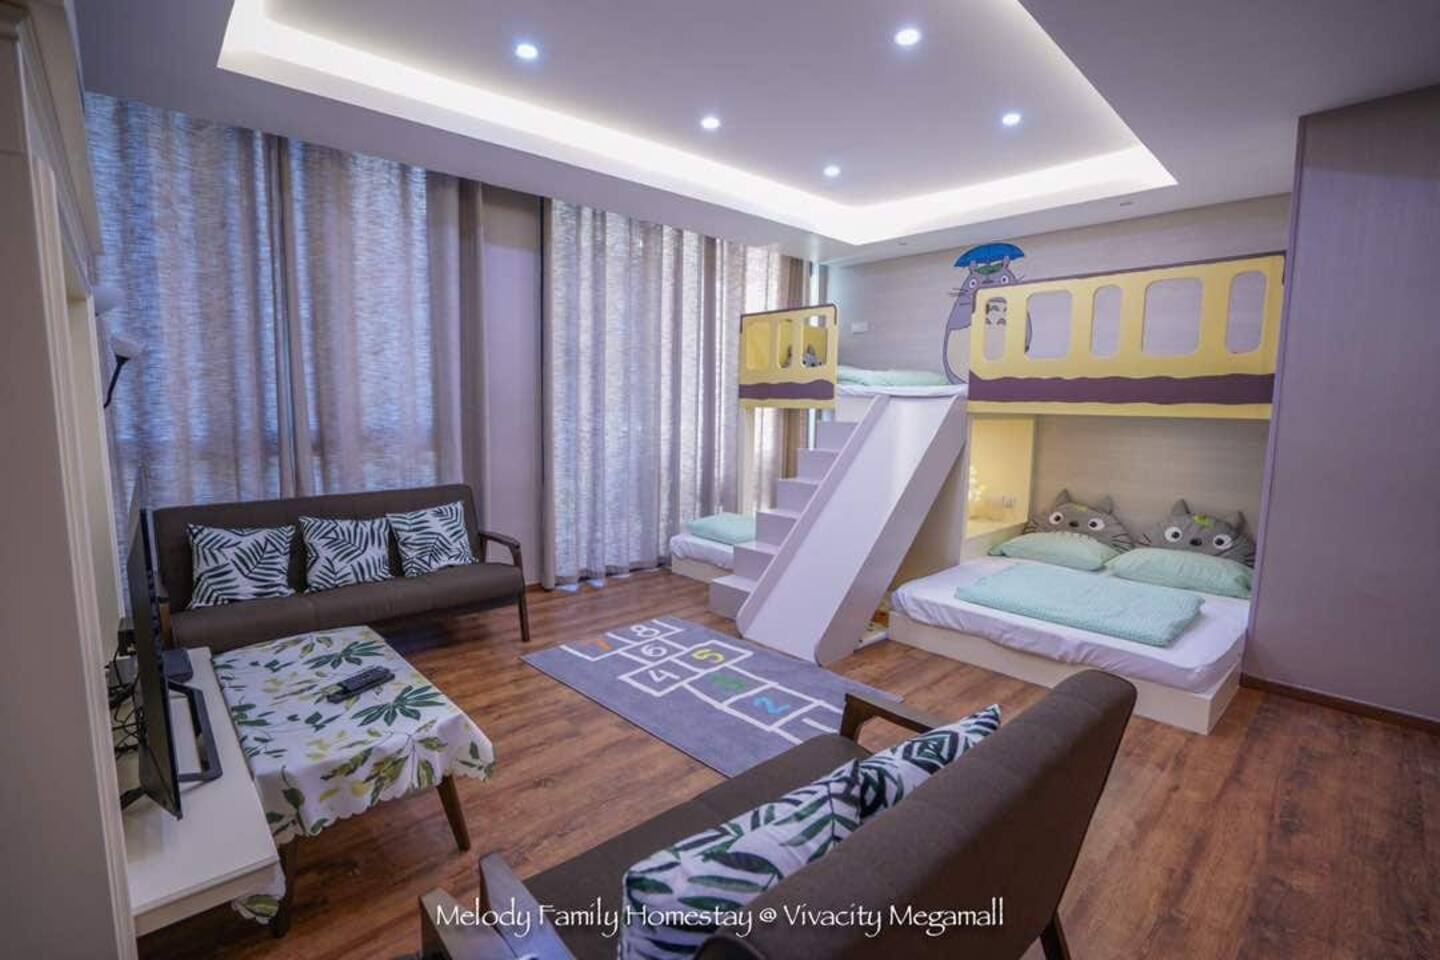 Melody Family Homestay @ Vivacity Megamall - Apartments for Rent